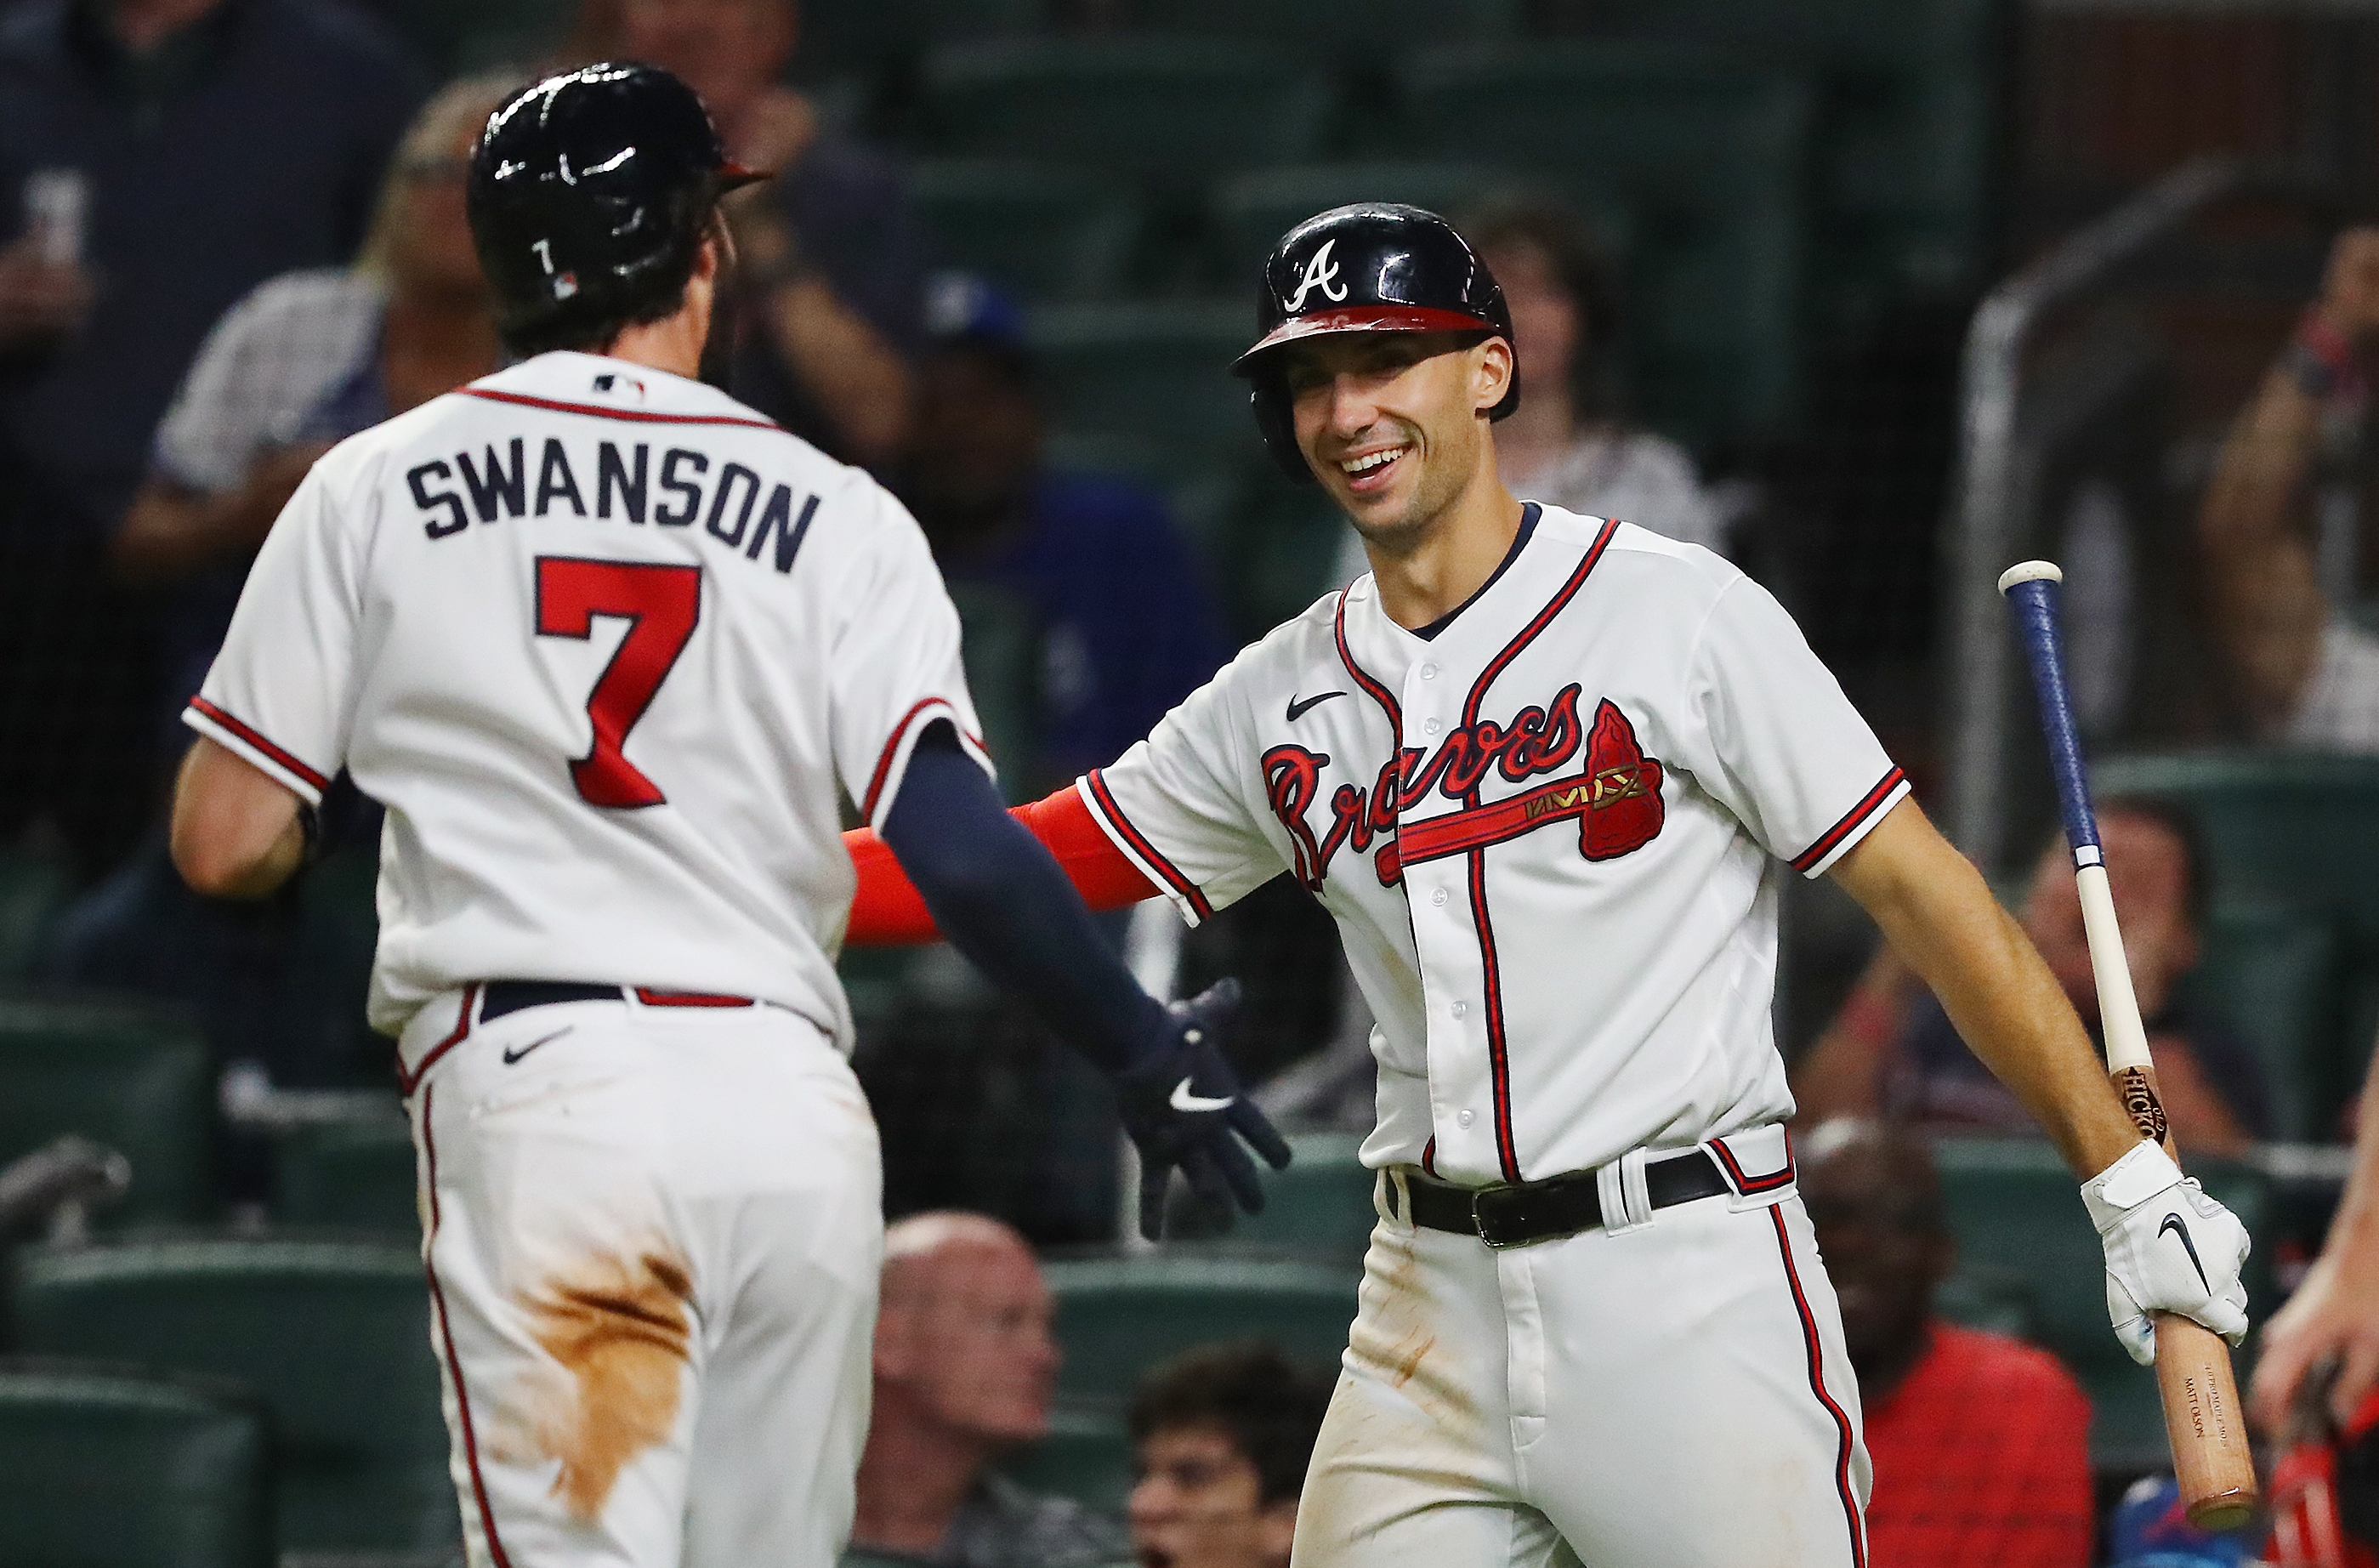 Dansby Swanson has four hits as Braves' offense comes alive in win